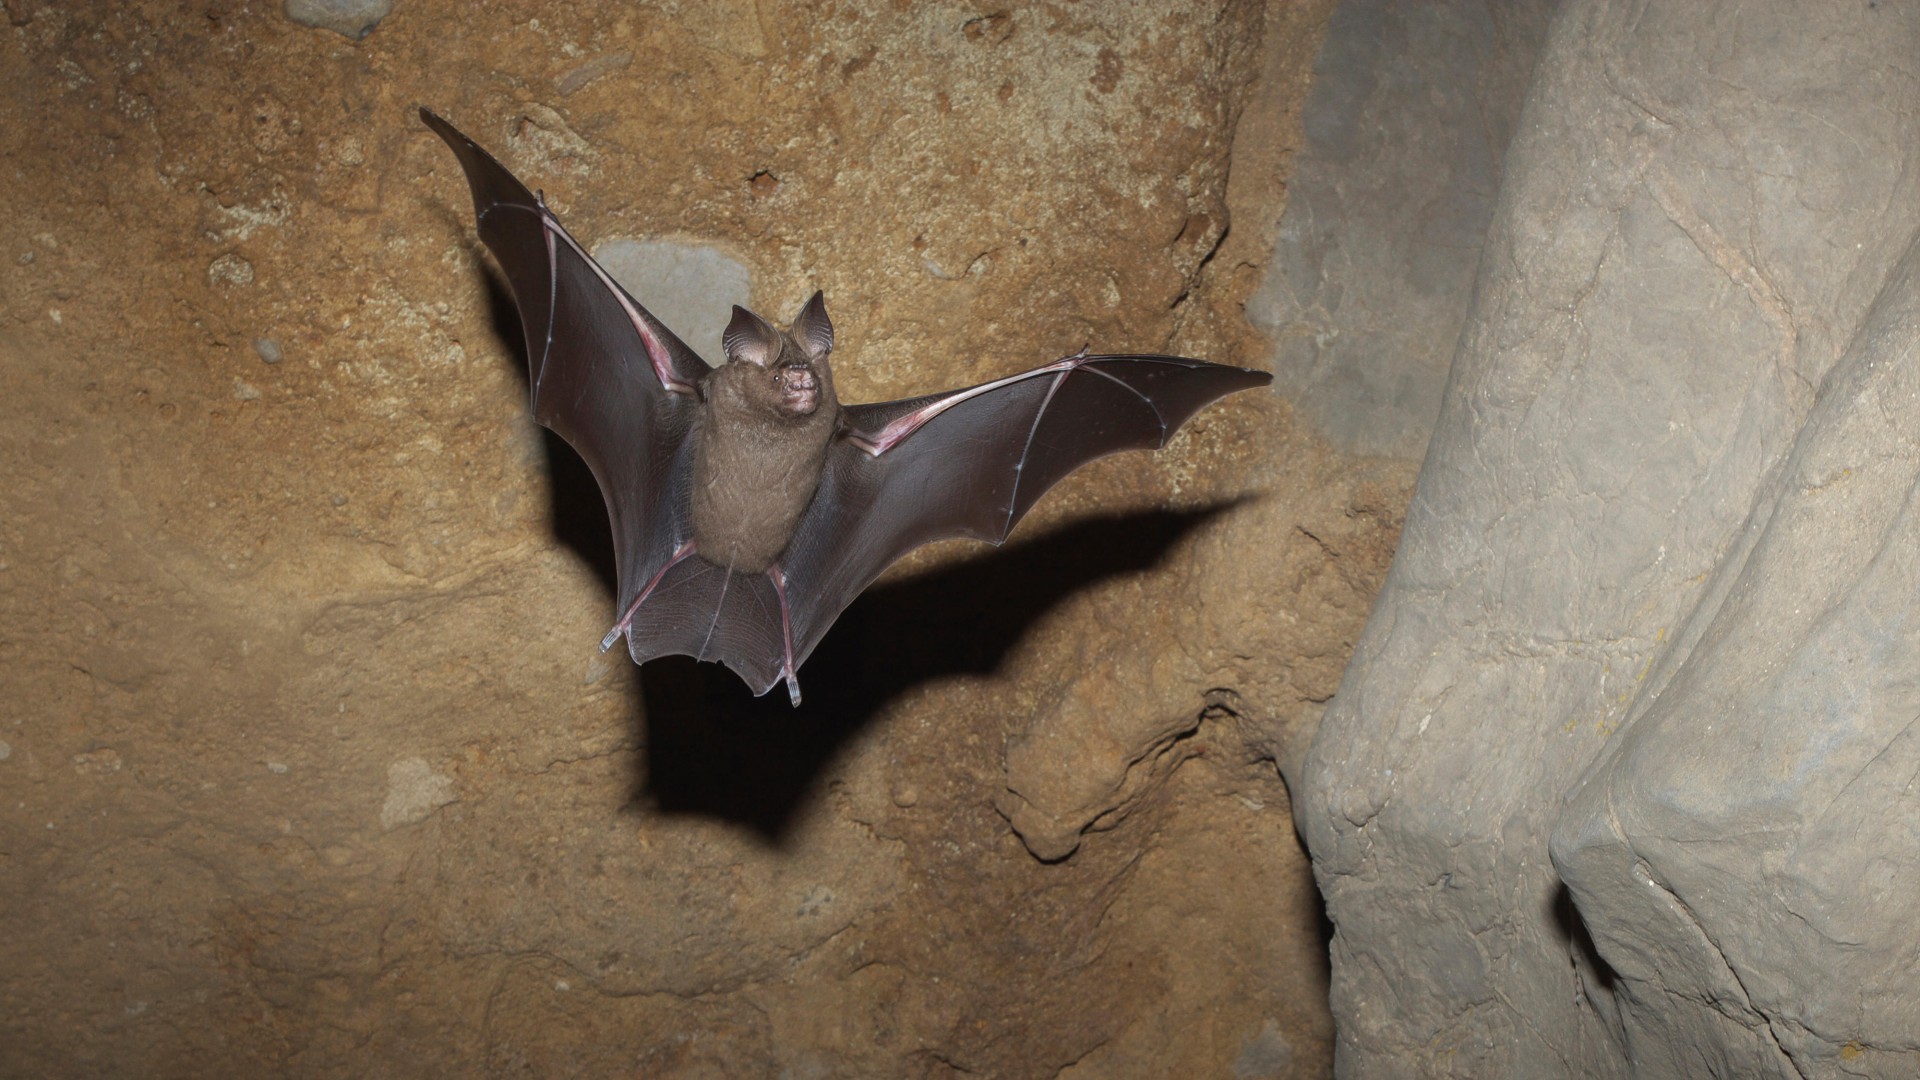 Great round leaf bat (Hipposideros armiger) in flight in cave, Guilin City, Guangxi Province, China, Novembery.